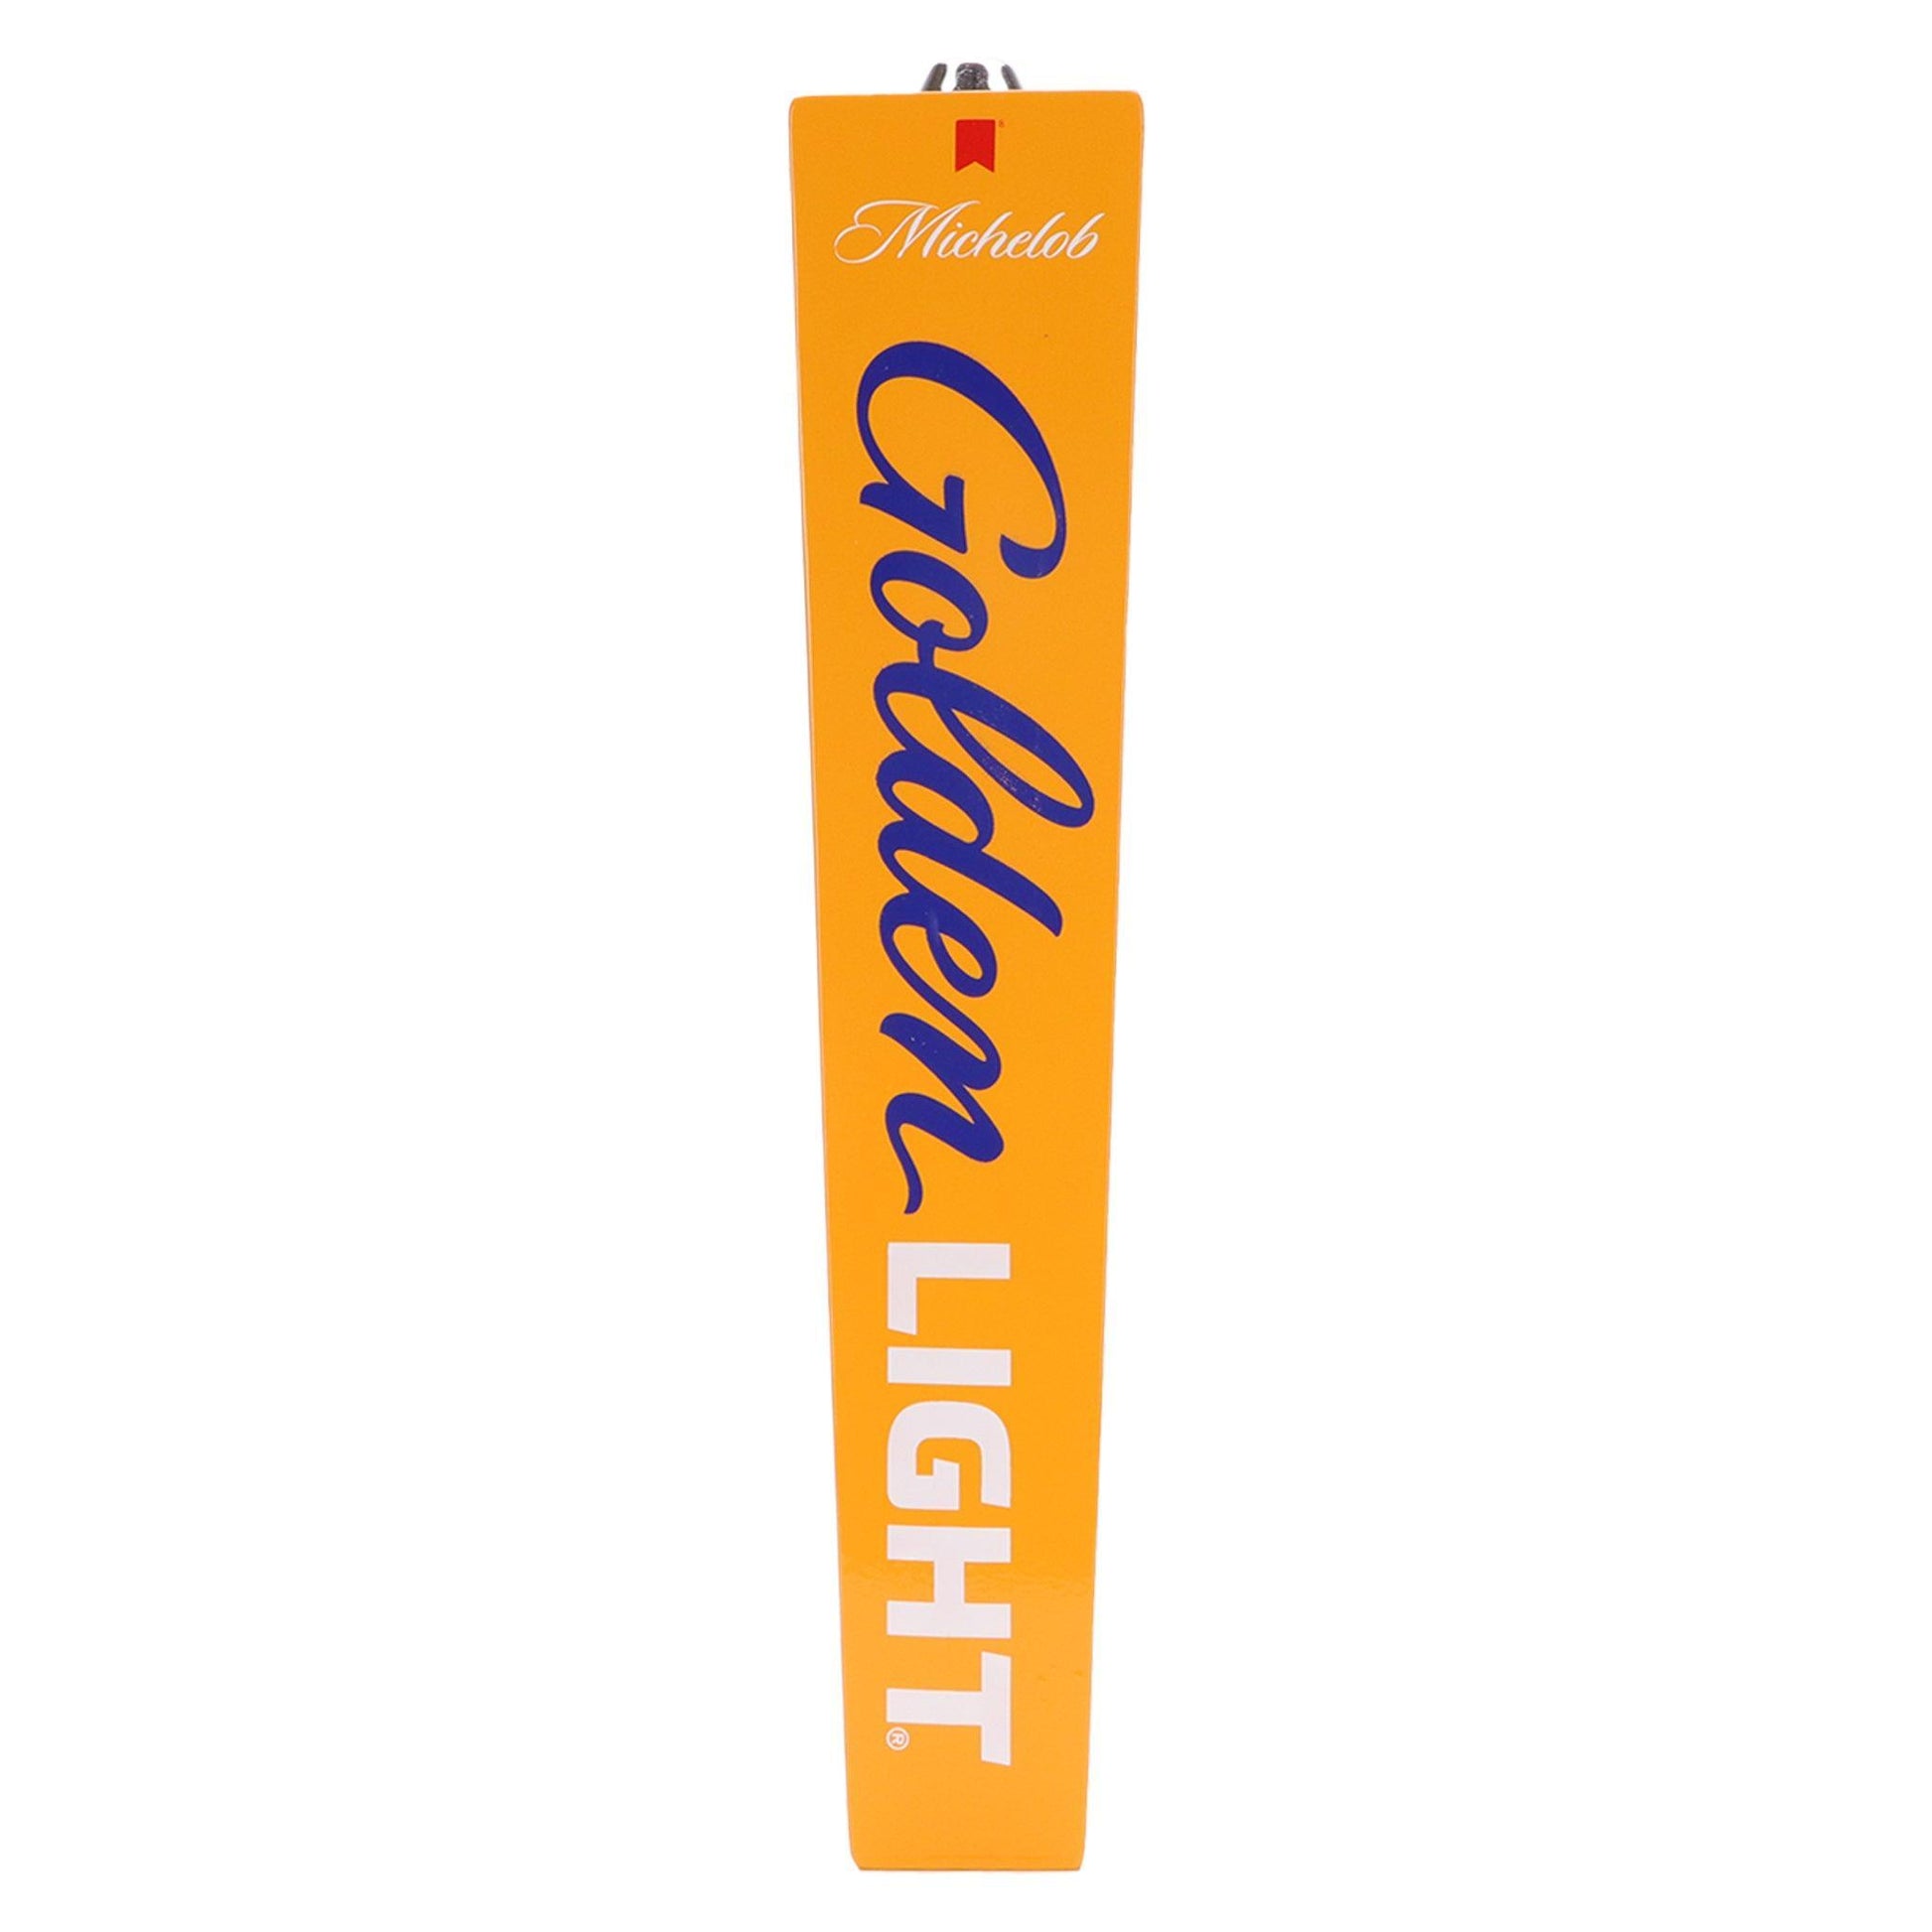 Michelob Golden Light gold tap handle - front